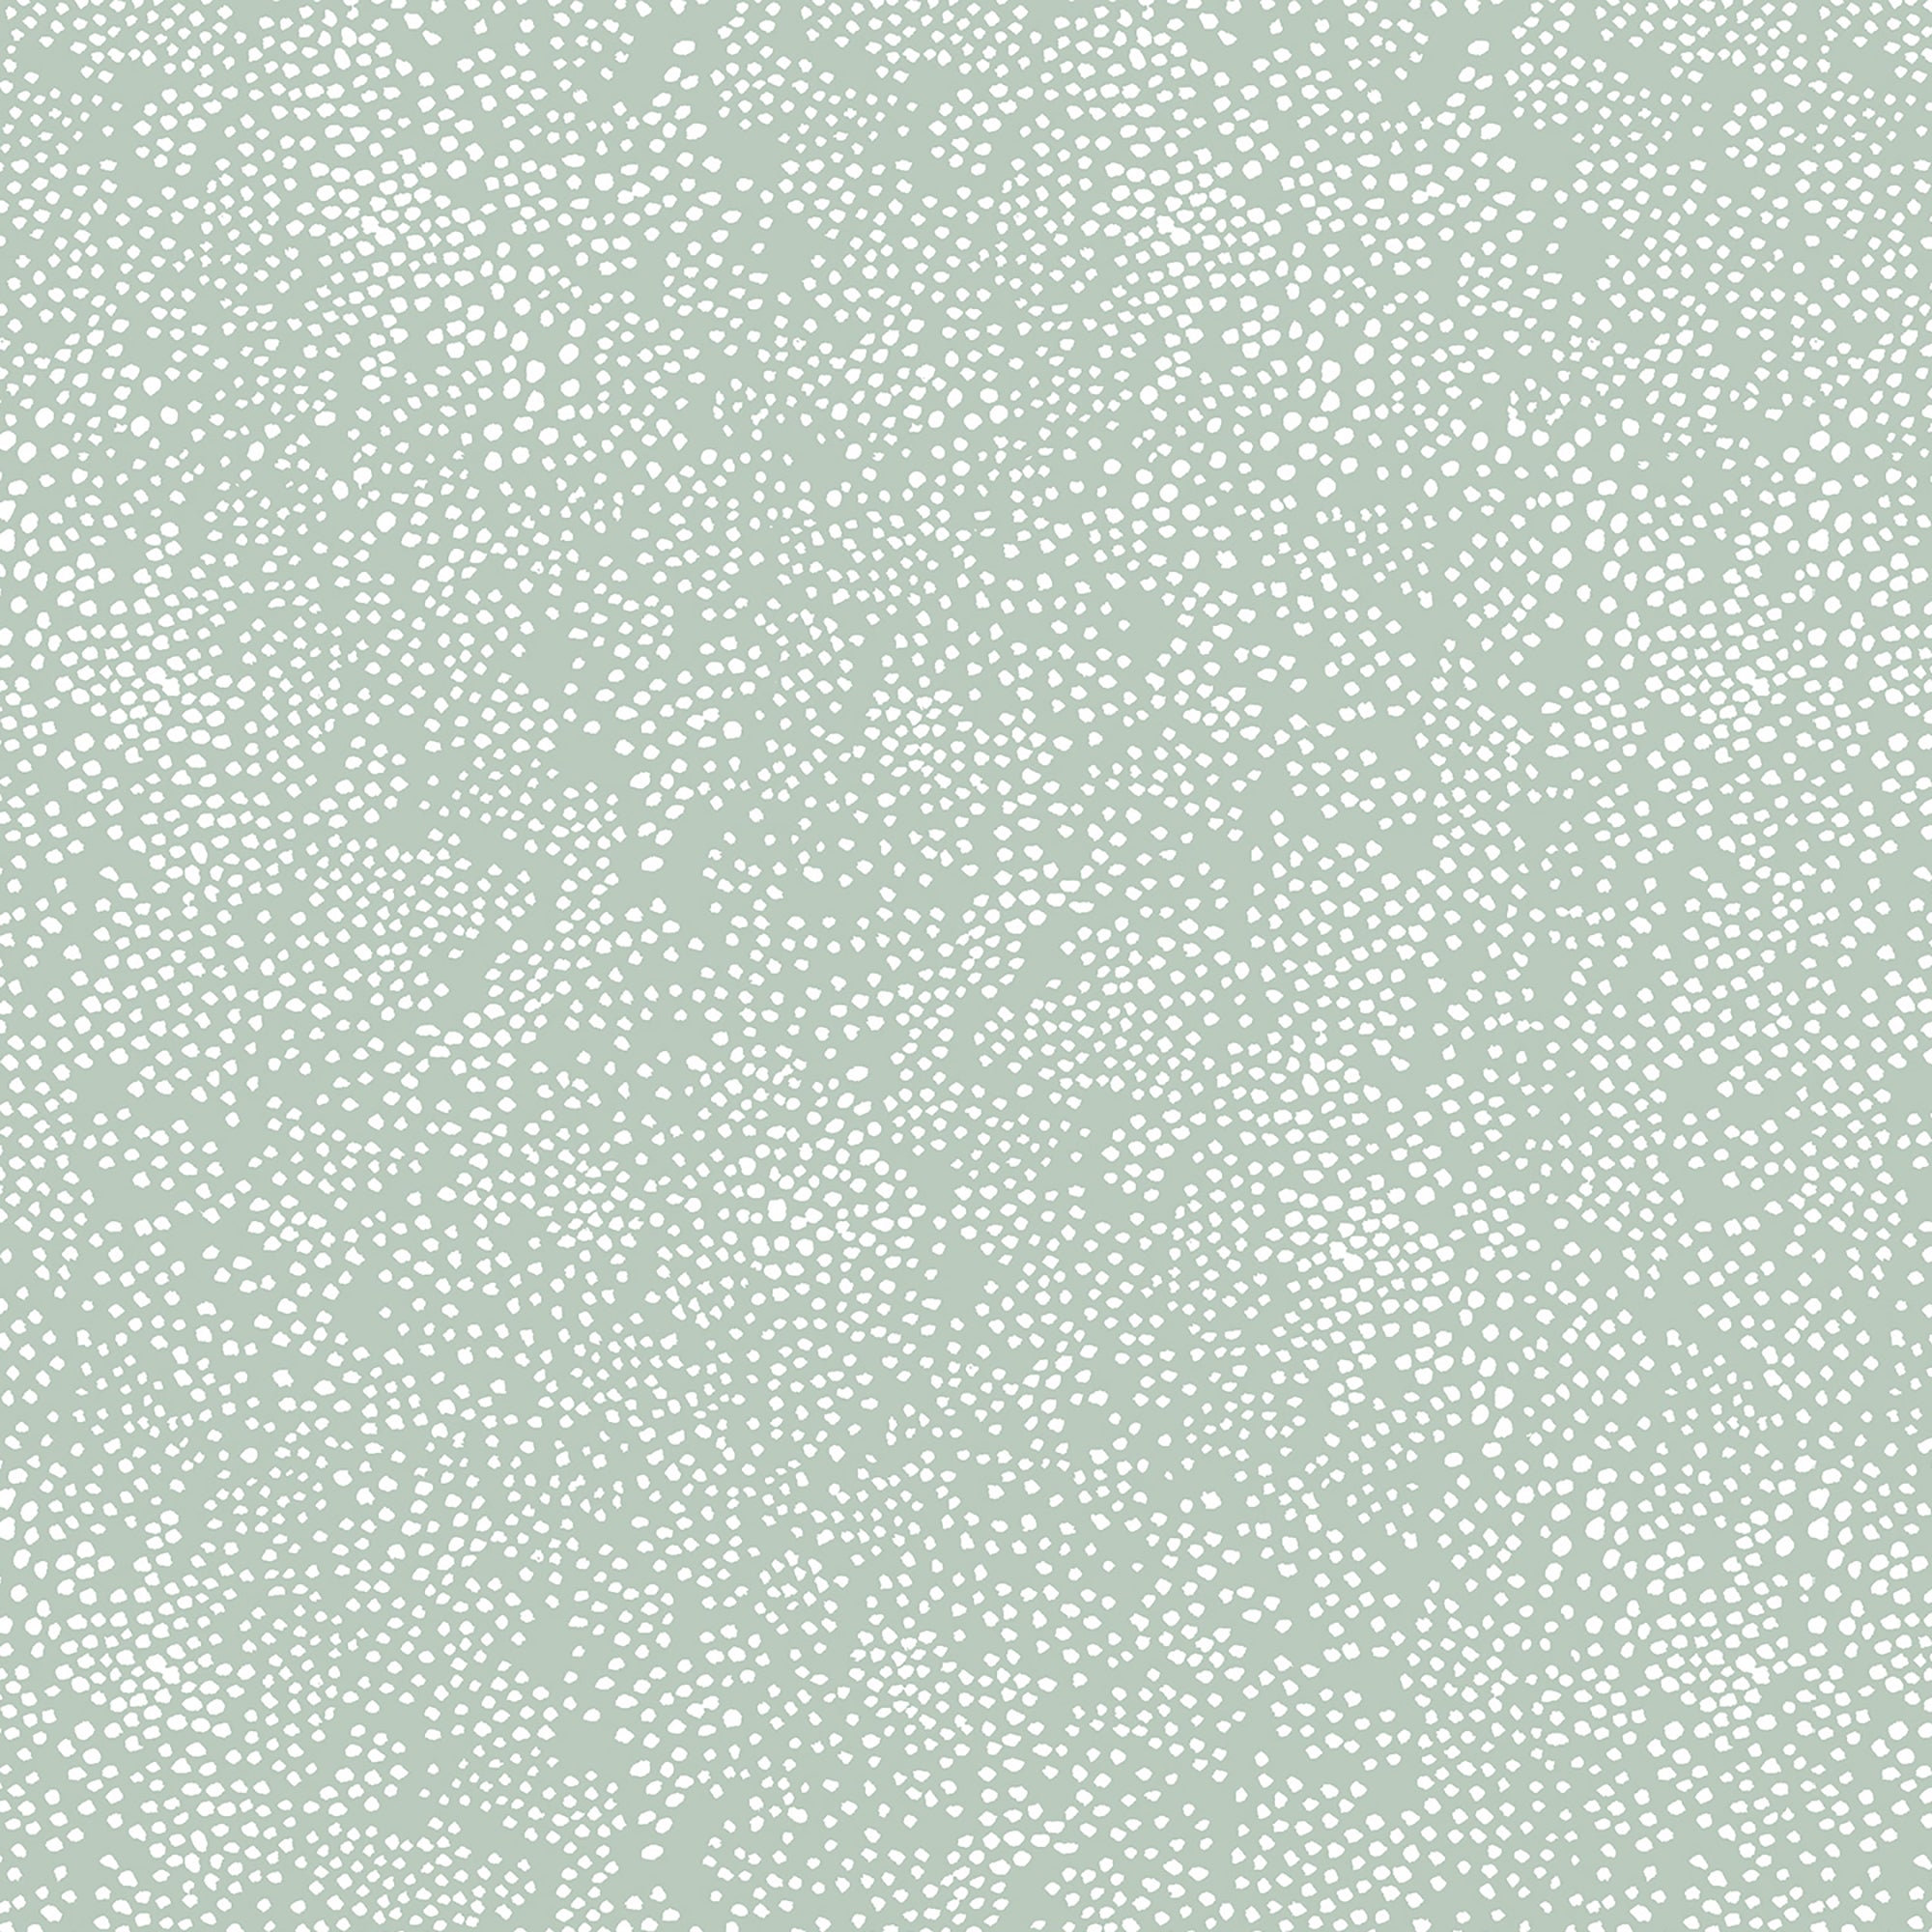 Rifle Paper Co. Basics - Menagerie Champagne Mint Fabric